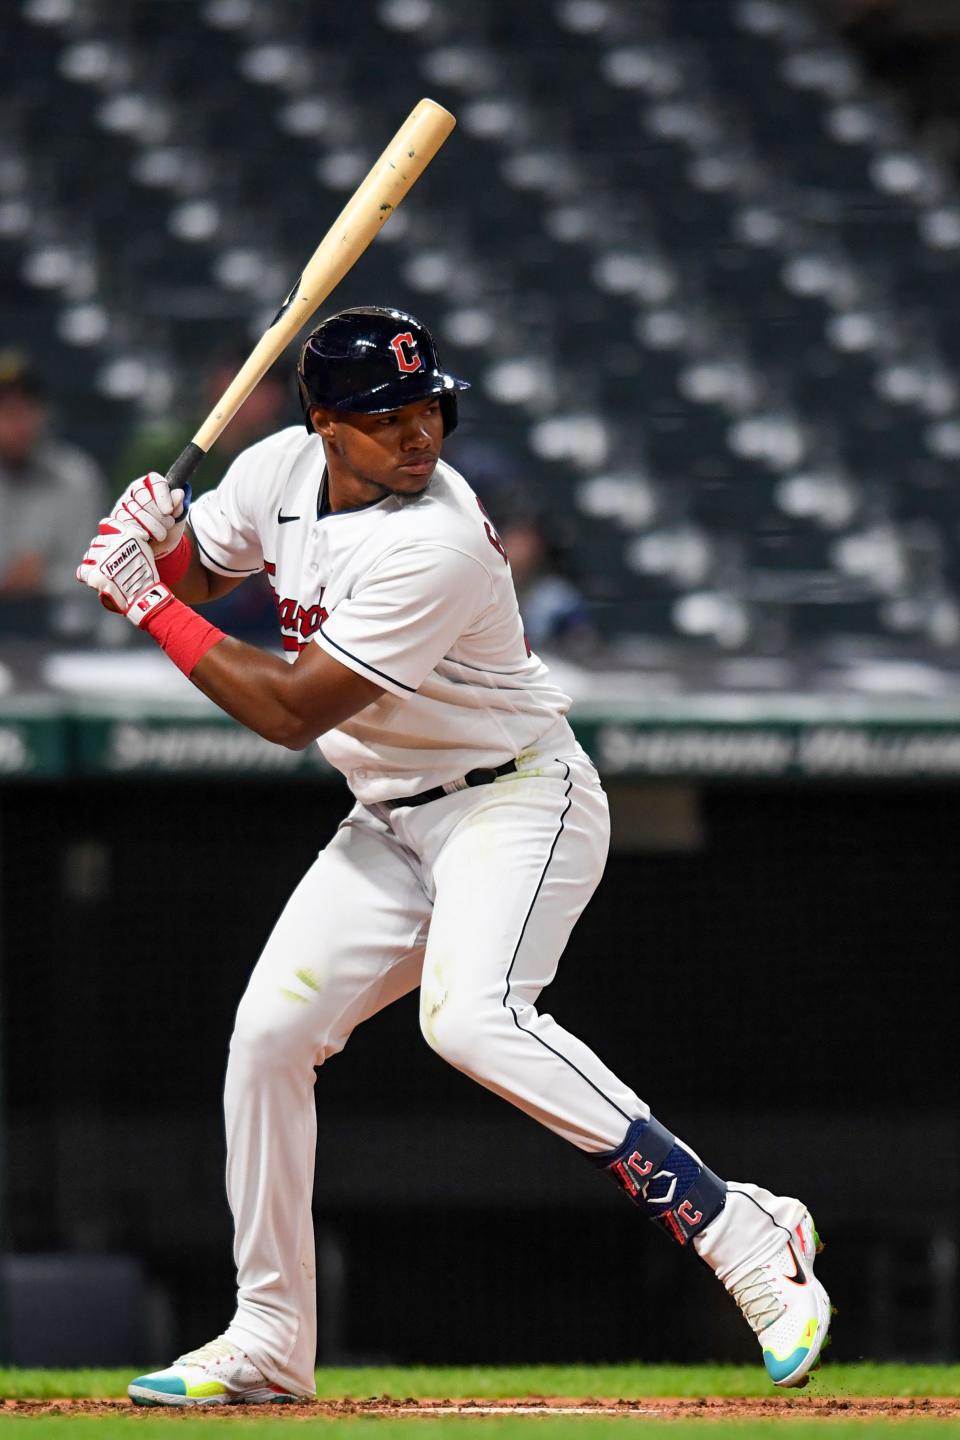 Cleveland Guardians' Oscar Gonzalez bats against the Texas Rangers during the fifth inning of a baseball game, Wednesday, June 8, 2022, in Cleveland. (AP Photo/Nick Cammett)